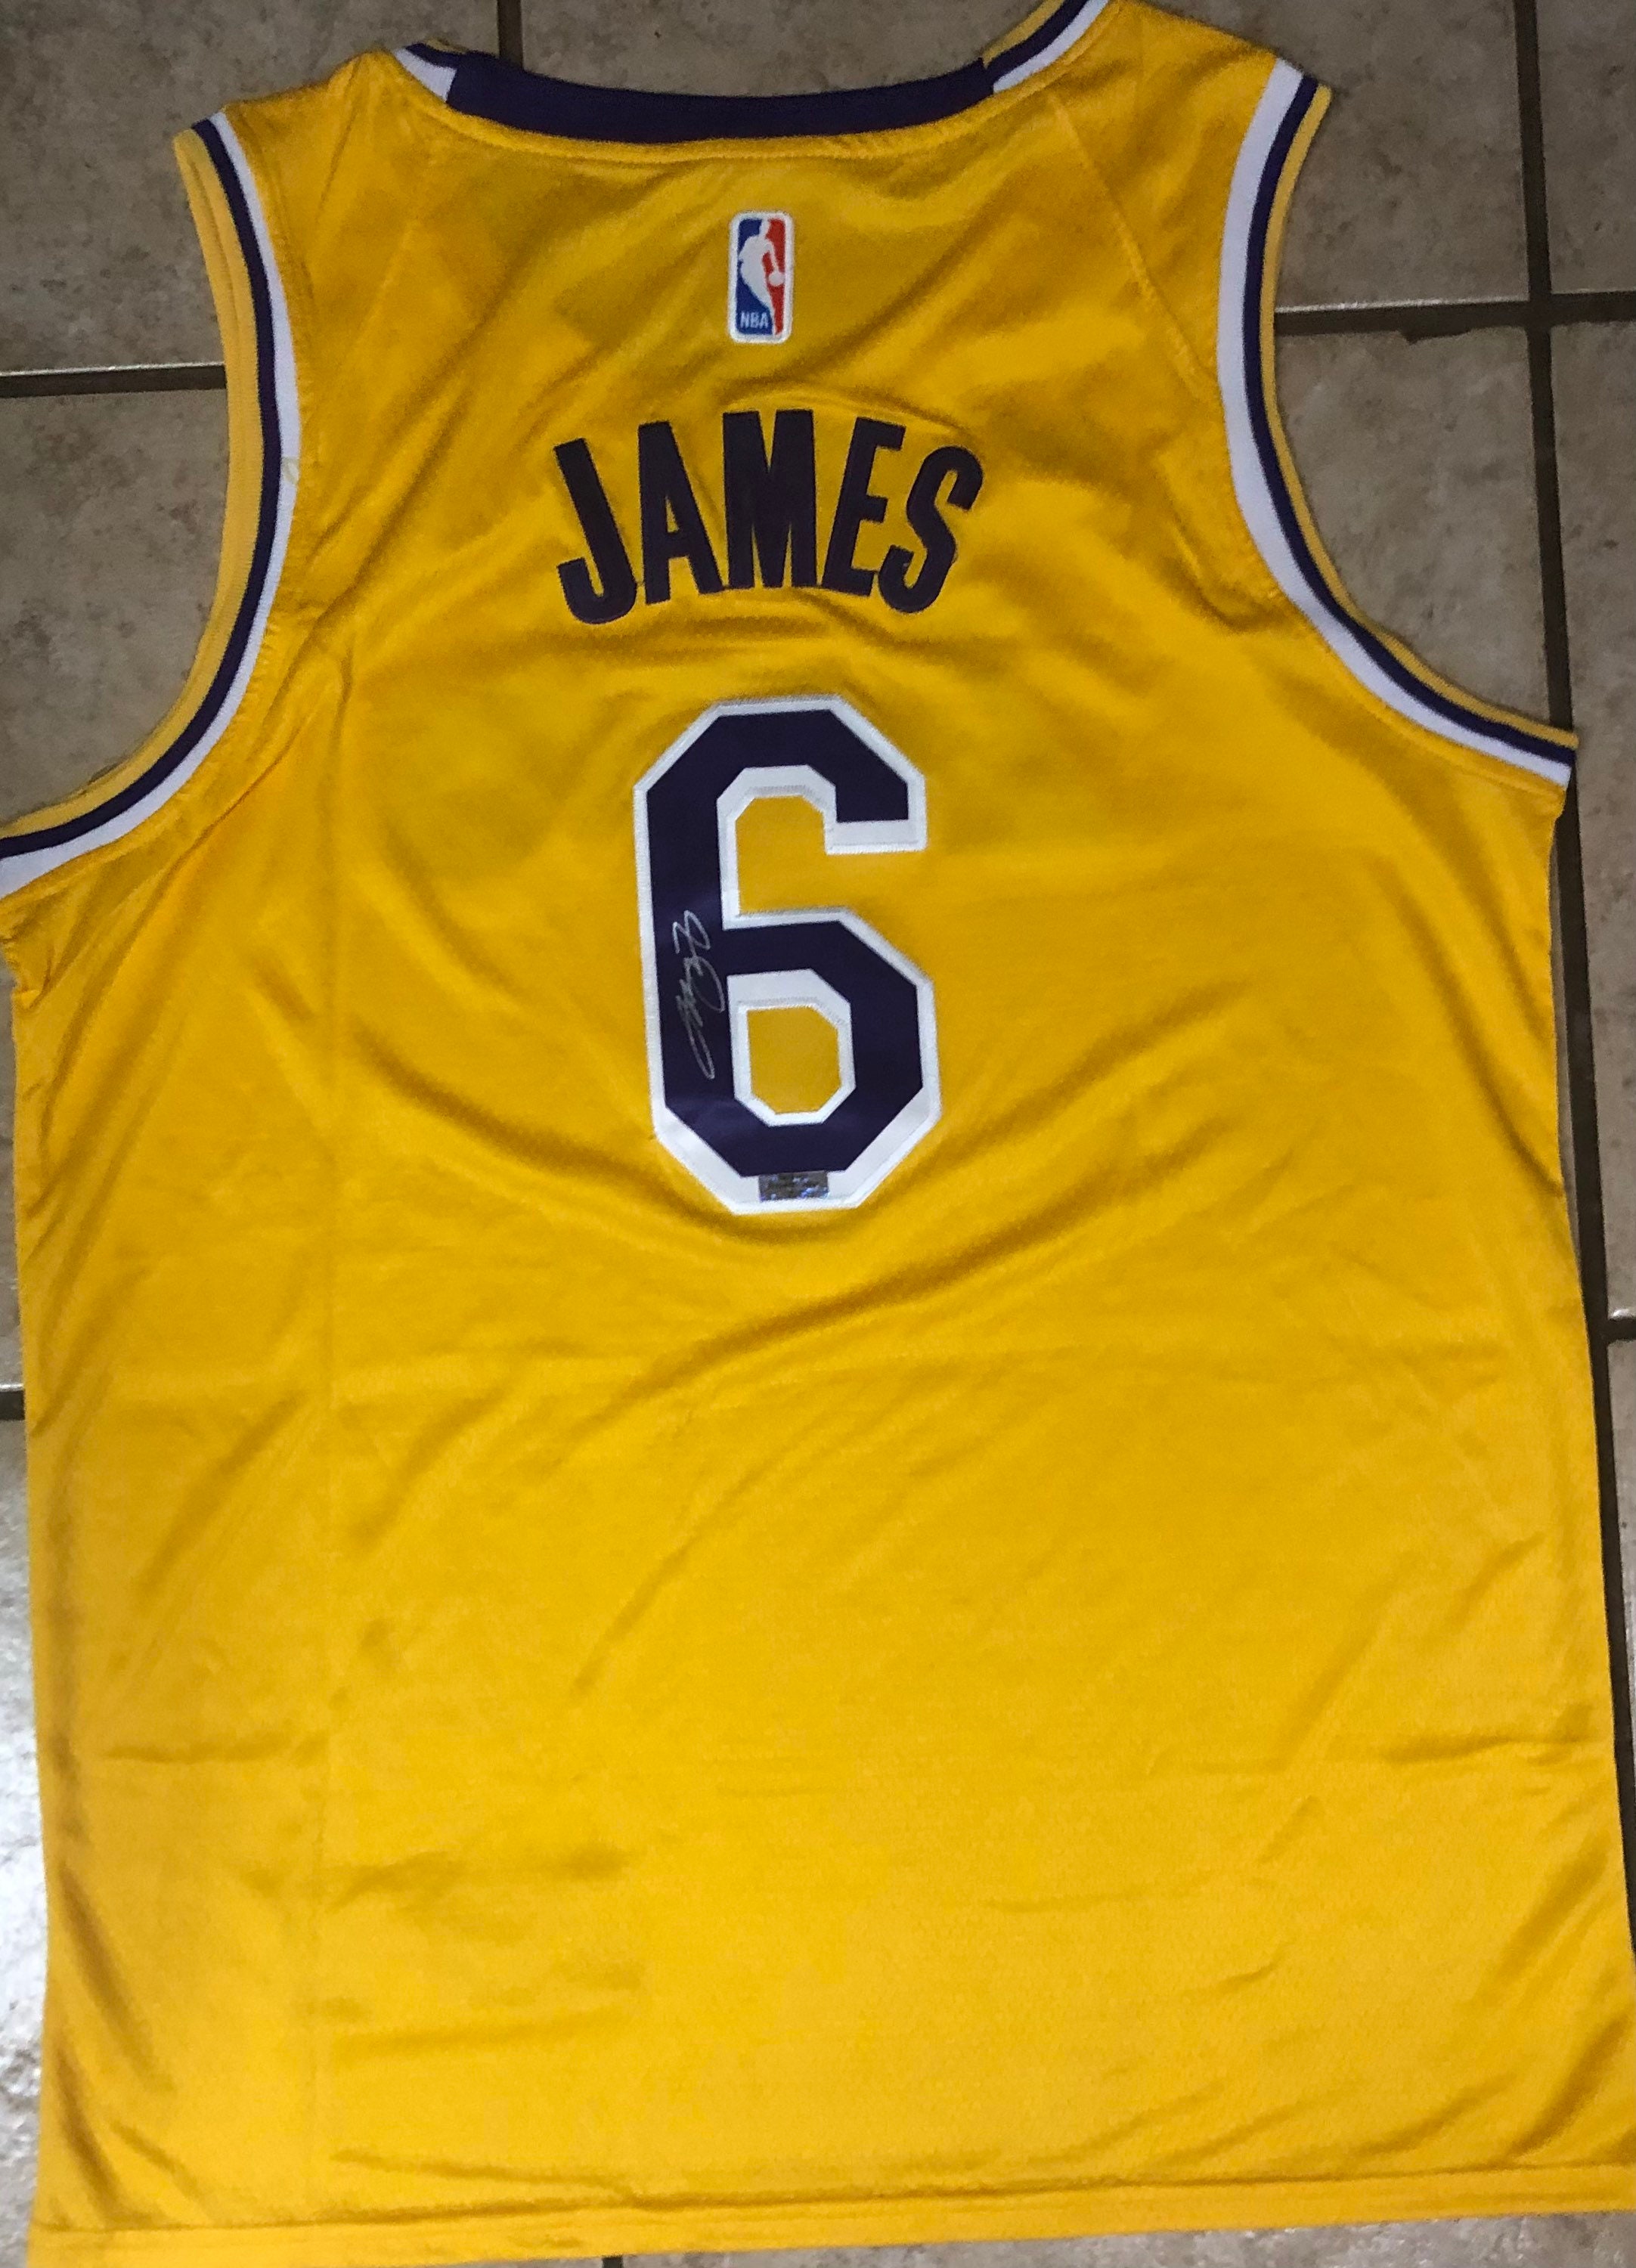  Mitchell & Ness Lebron James 2003-04 Authentic Jersey Cleveland  Cavaliers : Sports & Outdoors